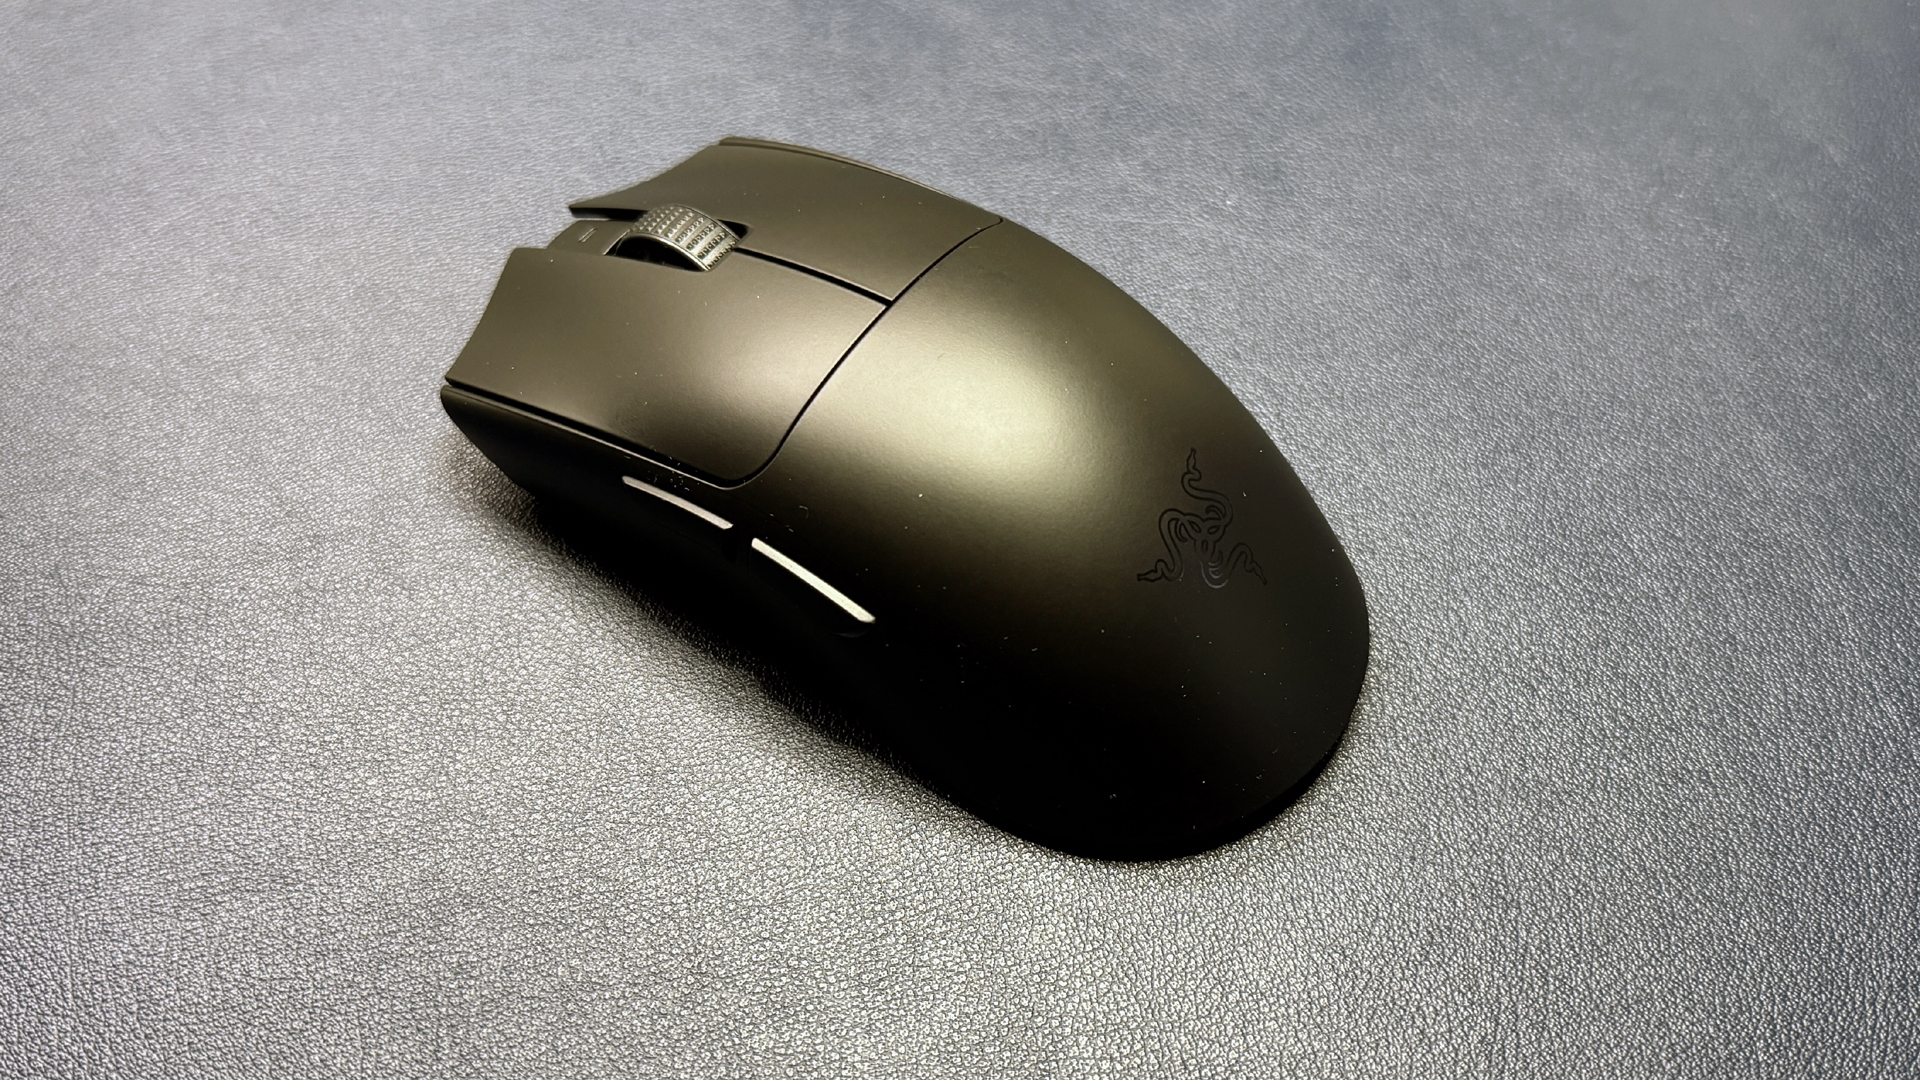 Razer Viper V3 Pro Review: For those who are committed to 8K wireless polling rates